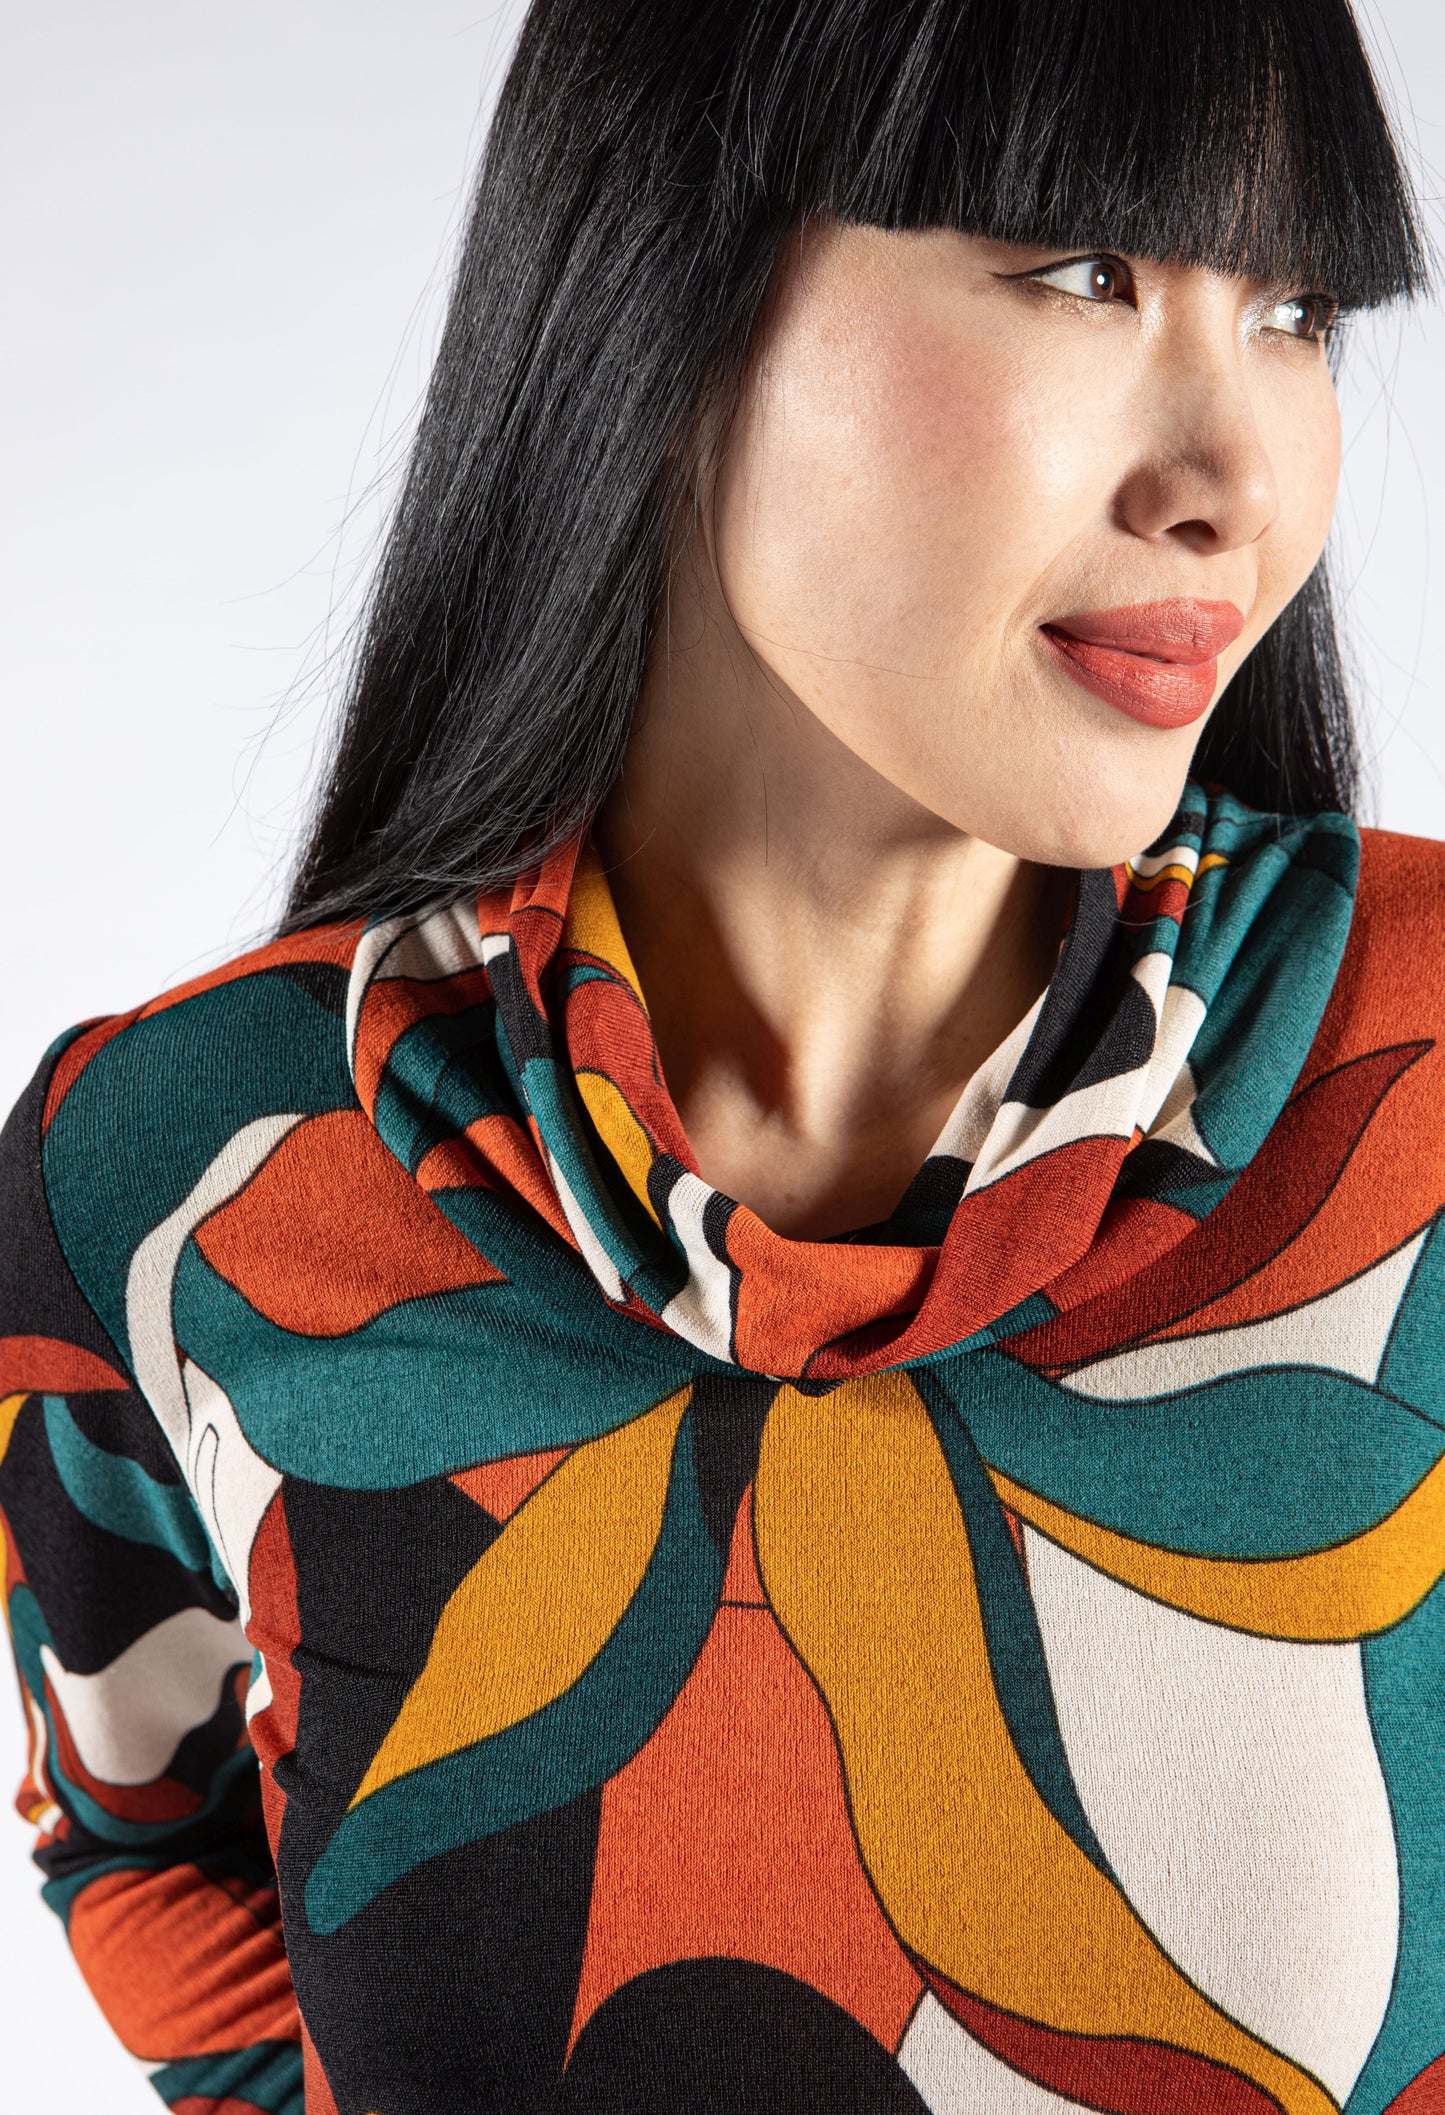 Abstract Print Cowl Neck Top